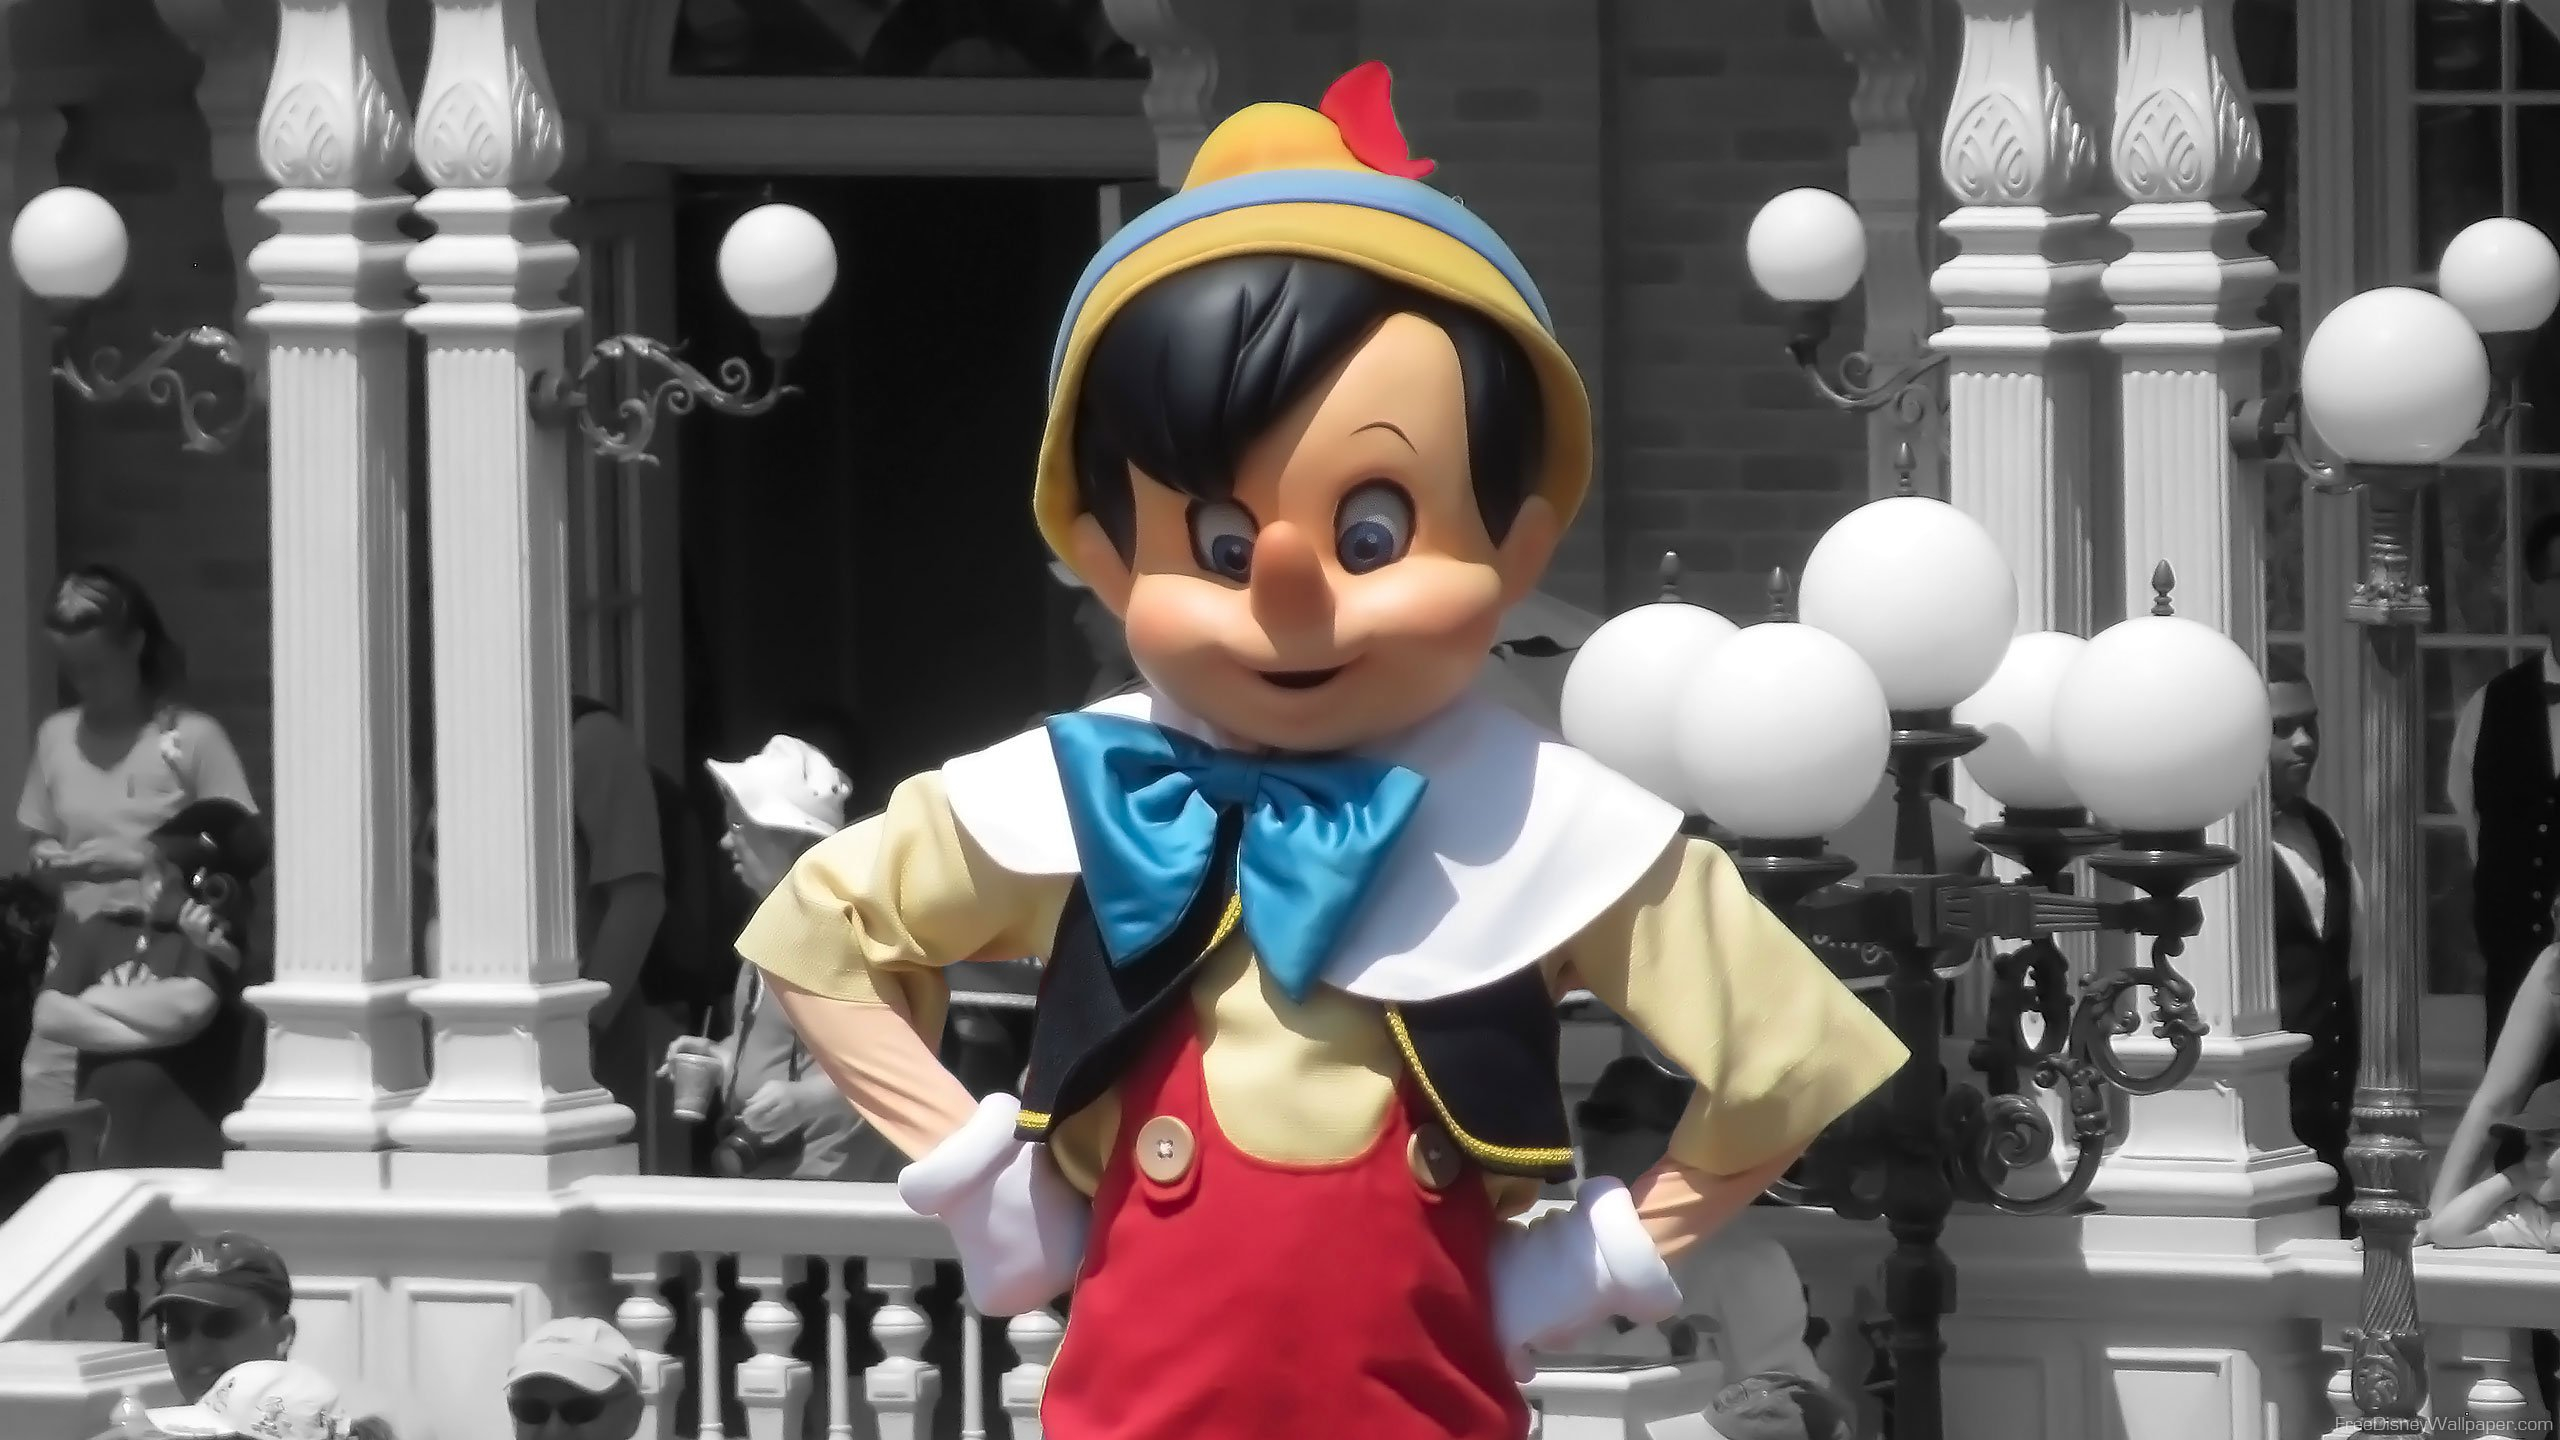 2560x1440 PINOCCHIO puppet disney comedy family animation fantasy 1pinocchio wood wooden marionette wallpaper | | 585715